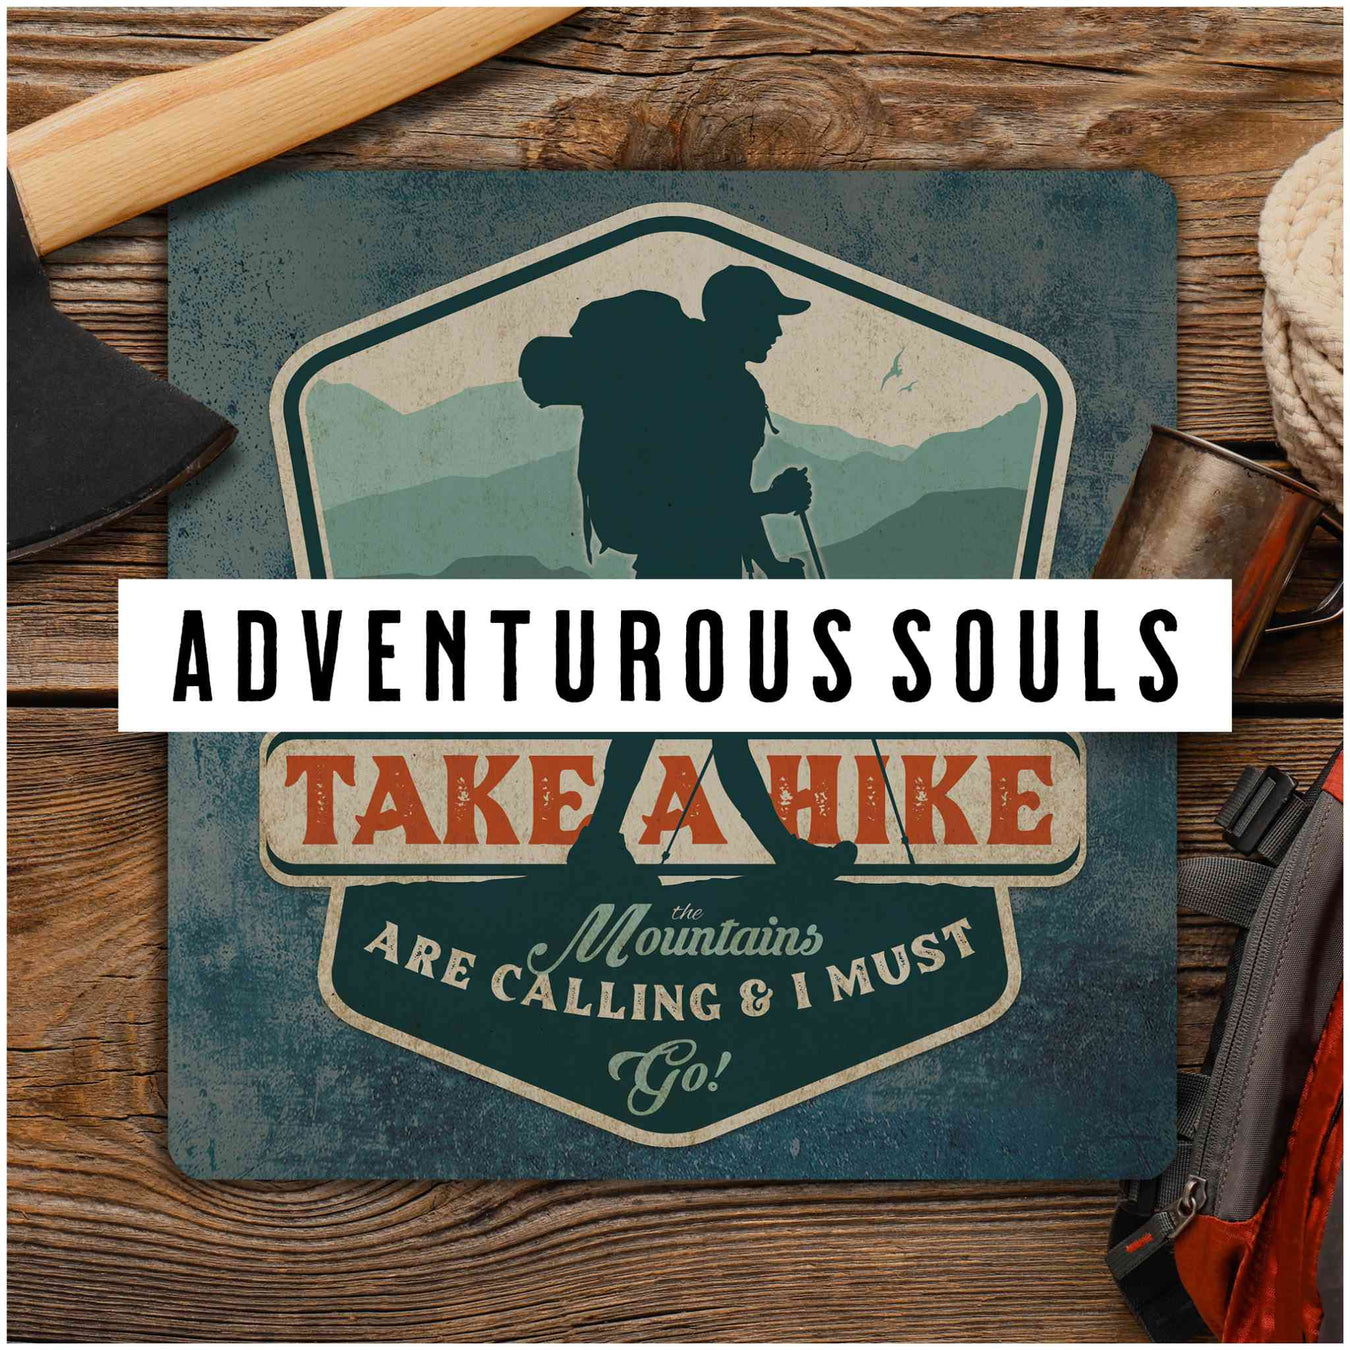 One of Sunshine Corner's Adventurous Souls Signs, "Take A Hike" with a banner labeled "Adventurous Souls" on the top with a dark overlay.